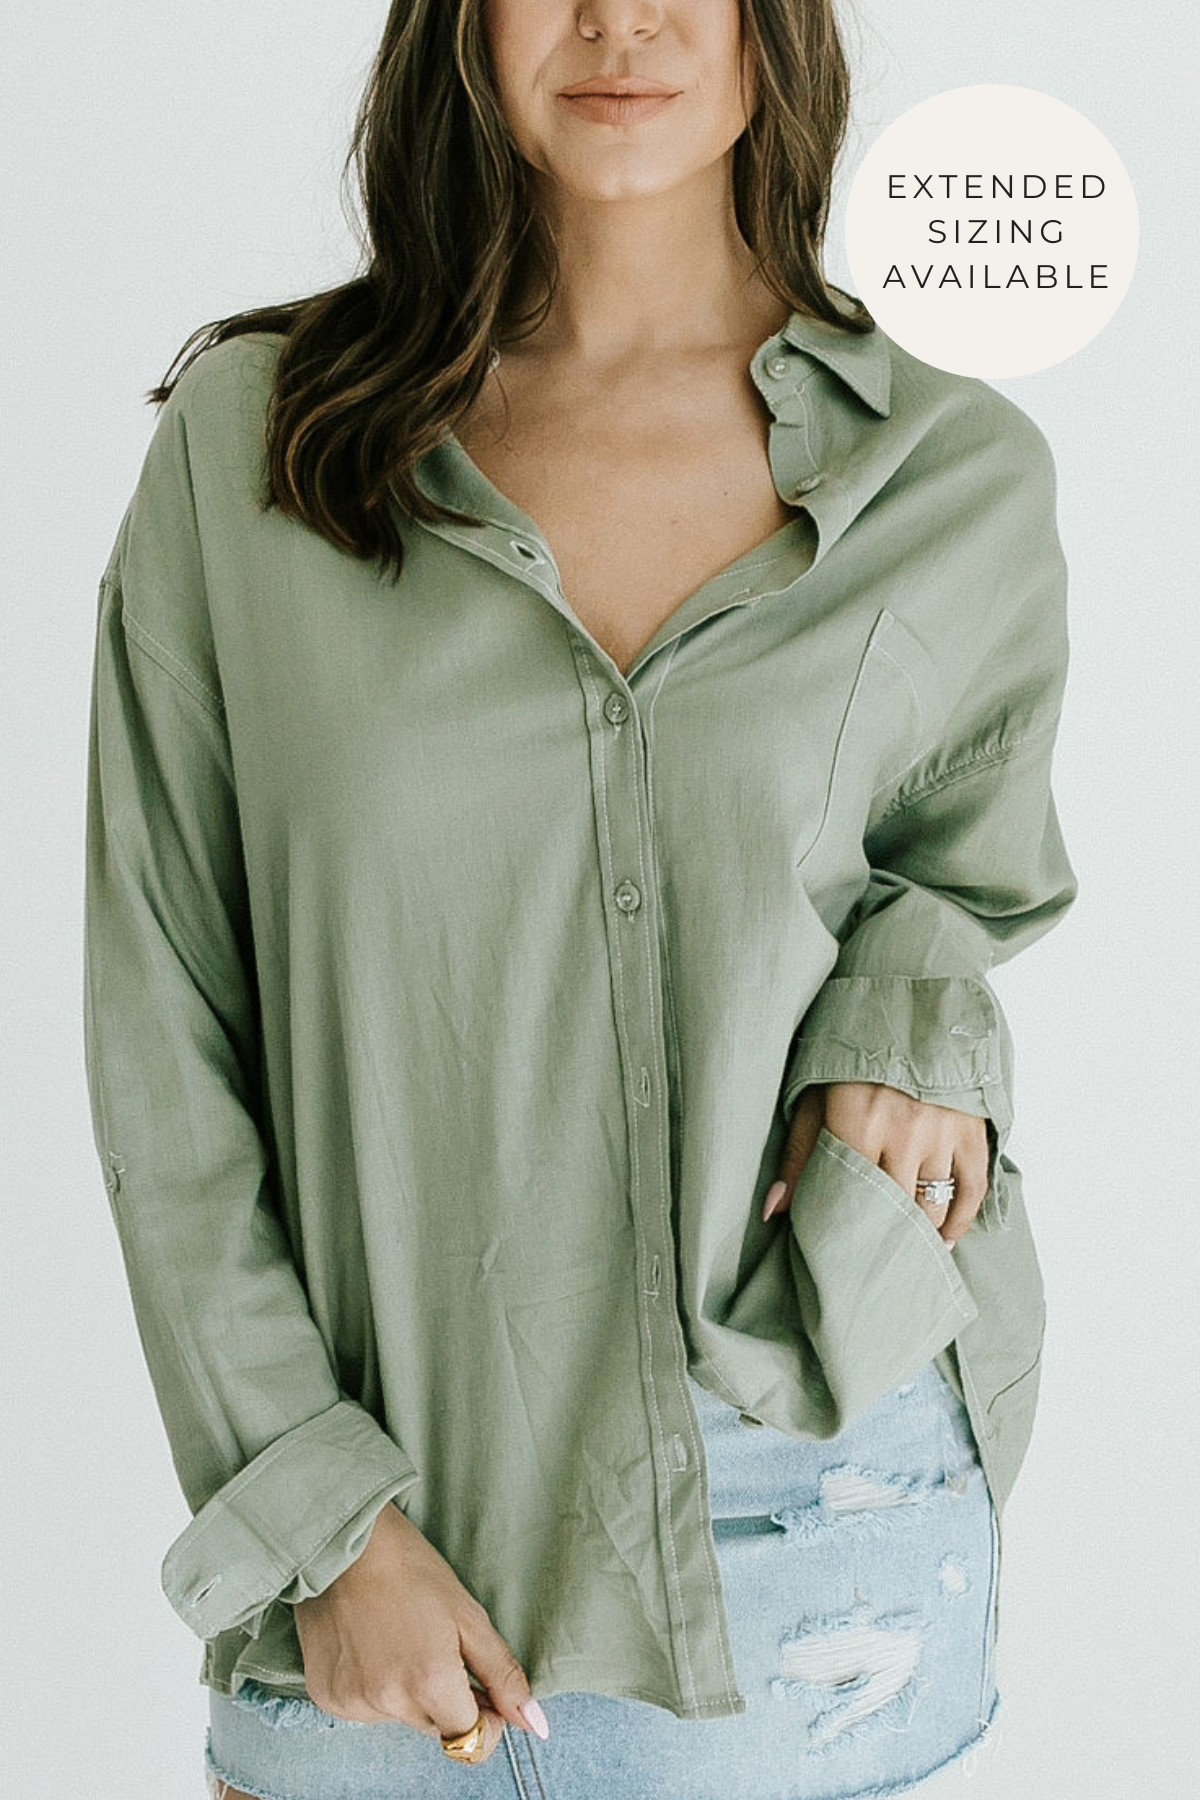 Better Yet Top - Olive